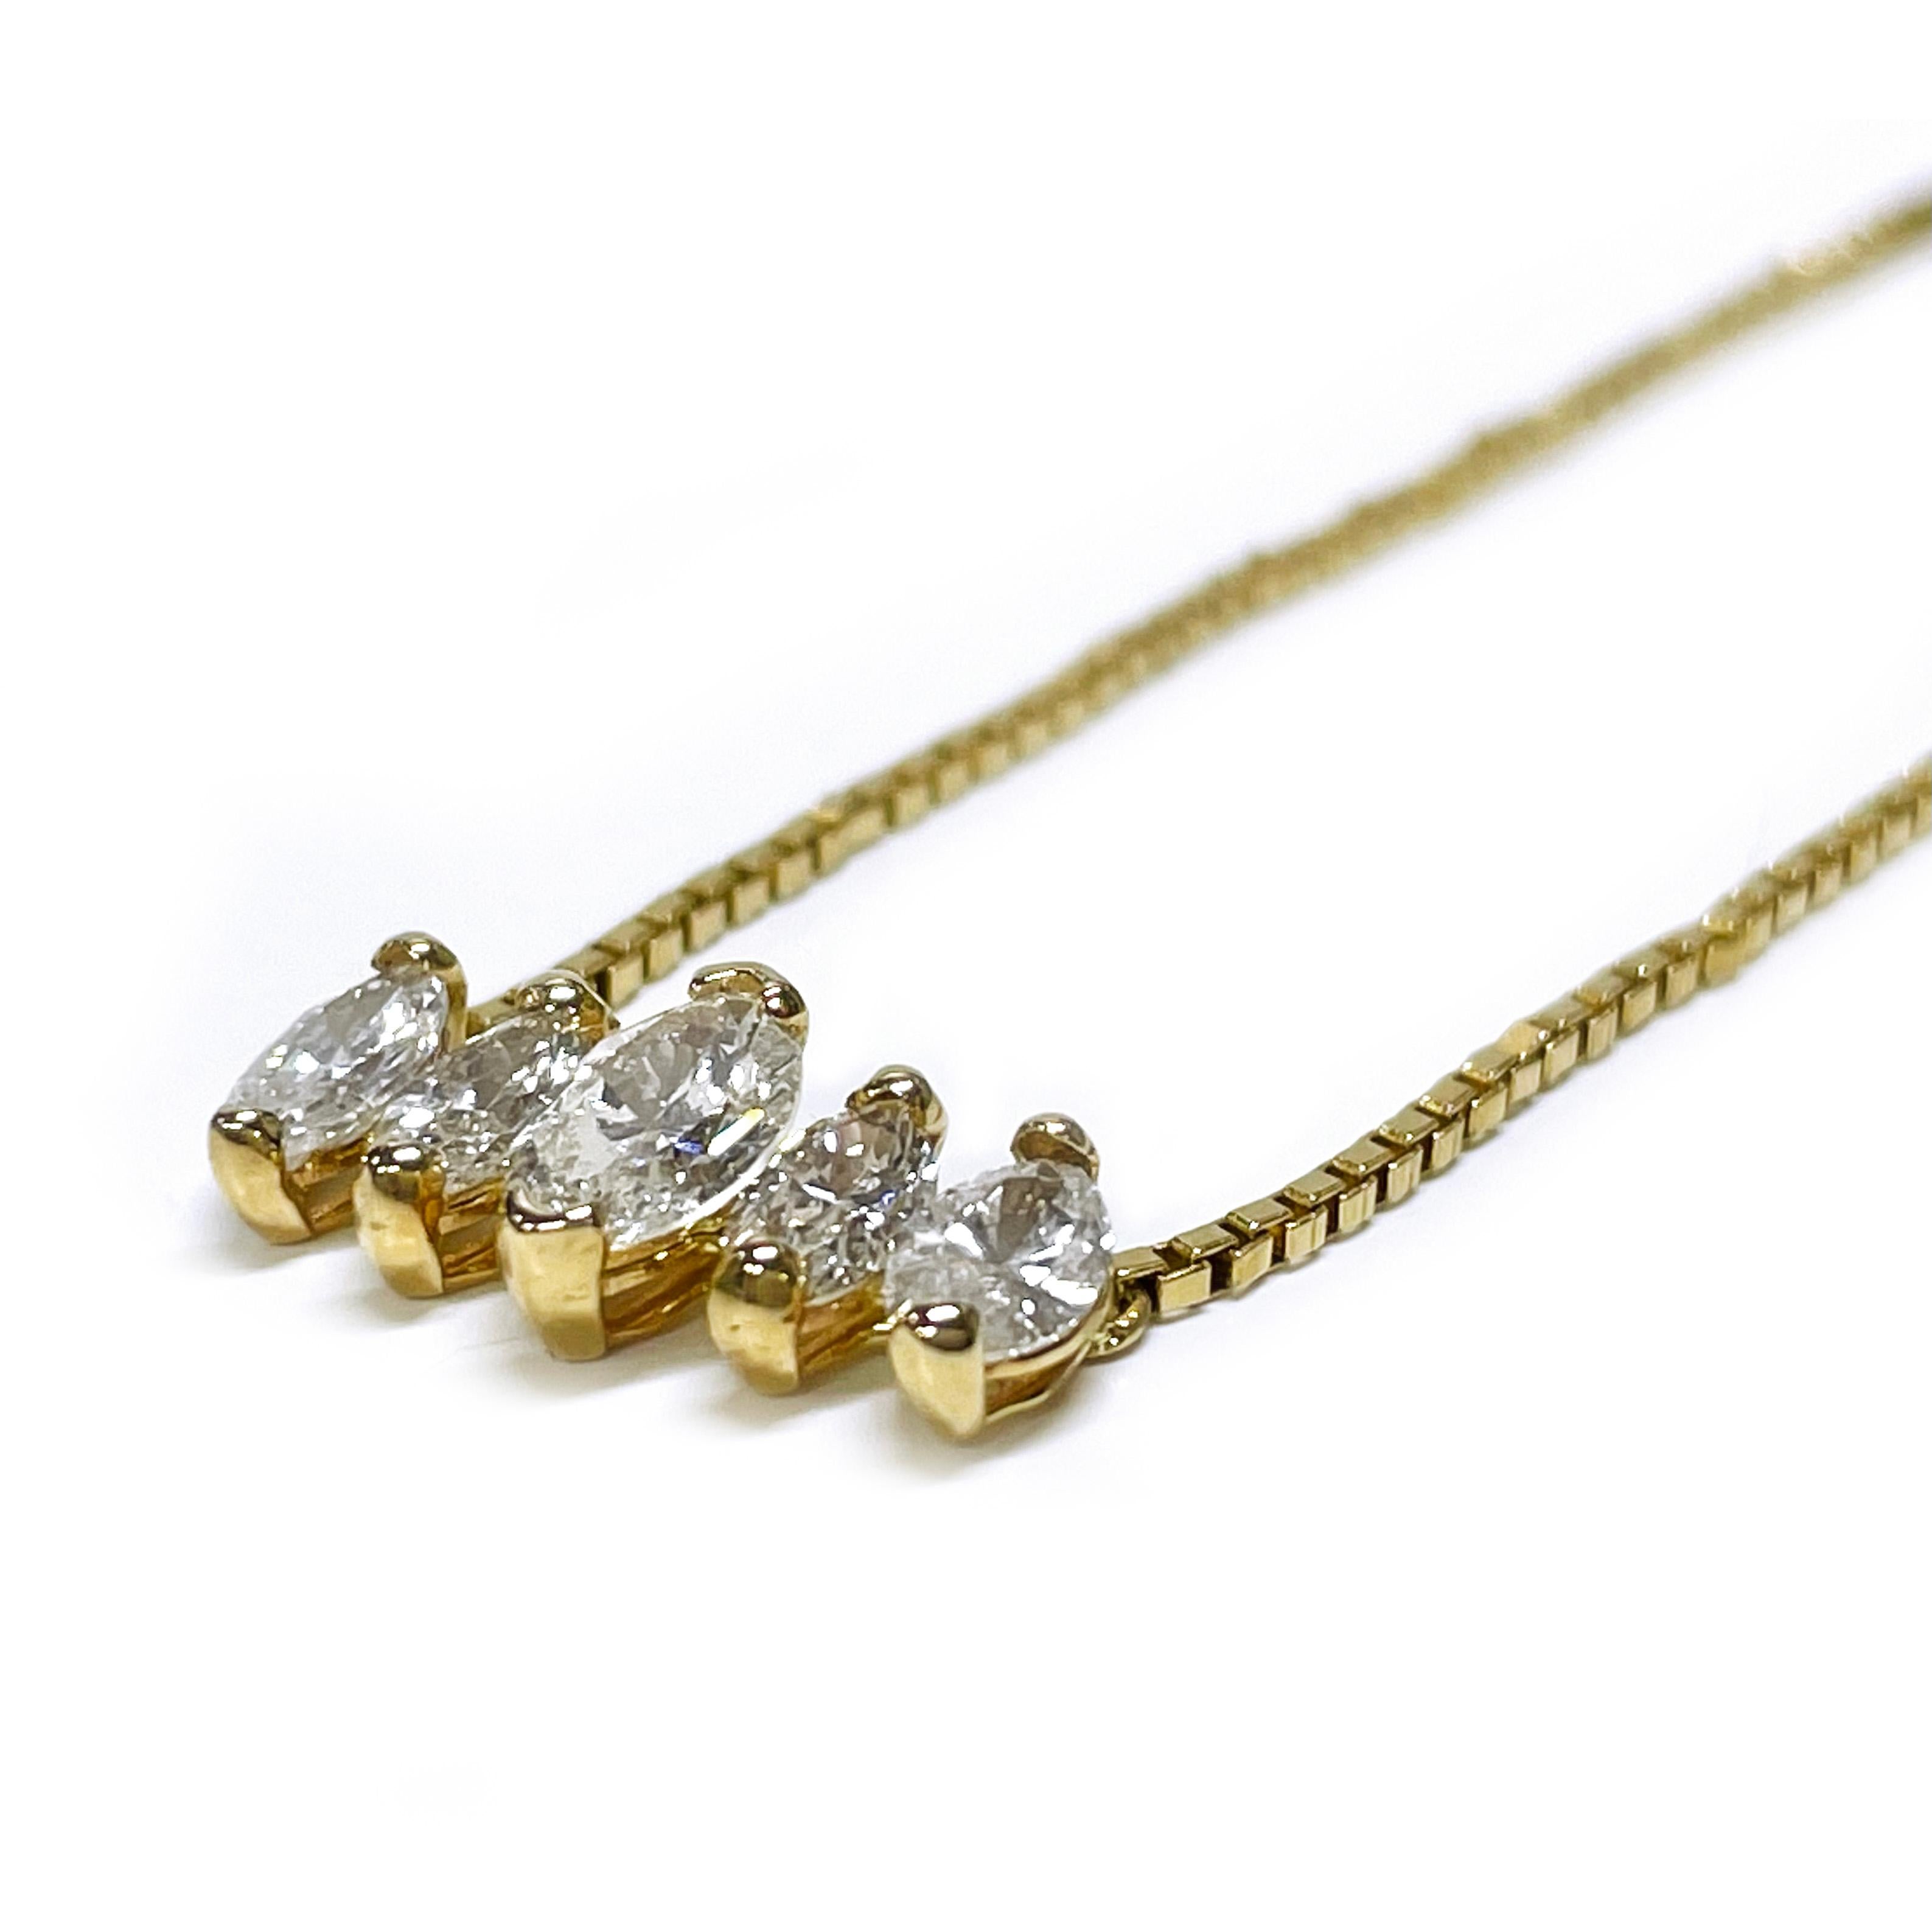 14 Karat Marquise Diamond Necklace. The necklace features five marquise-cut diamonds set with the largest in the middle and the smaller diamonds on the sides. One diamond is 6.8 x 3.9mm with a carat weight of 0.35ct and four diamonds are 5.5 x 2.8mm